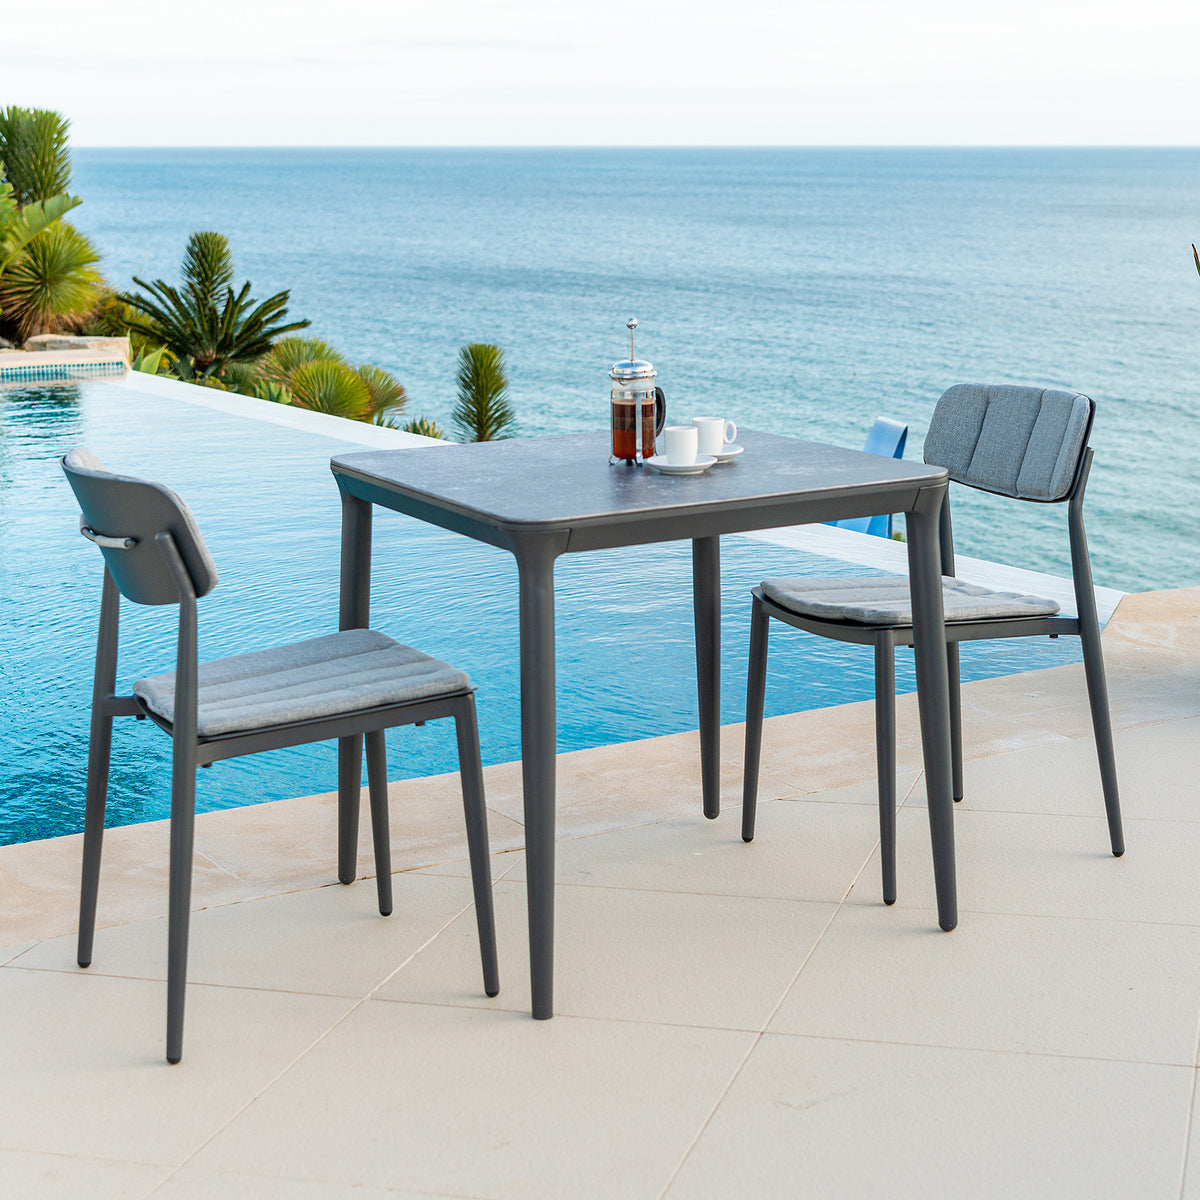 Alexander Rose Outdoor Rimini Stacking Side Chair